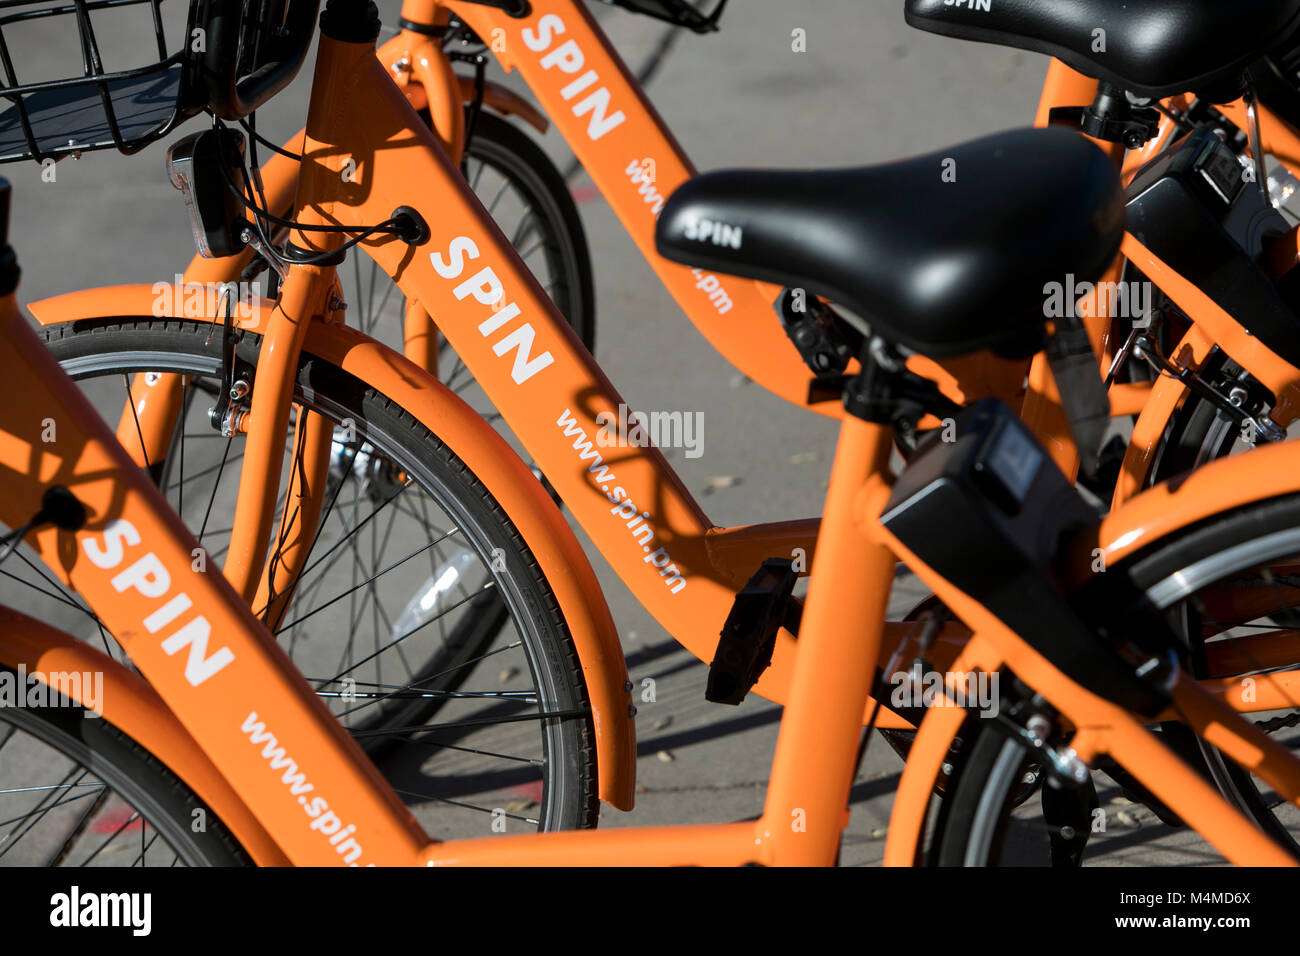 A row of Spin dock-less bicycle-sharing bikes in Tempe, Arizona, on February 3, 2018. Stock Photo